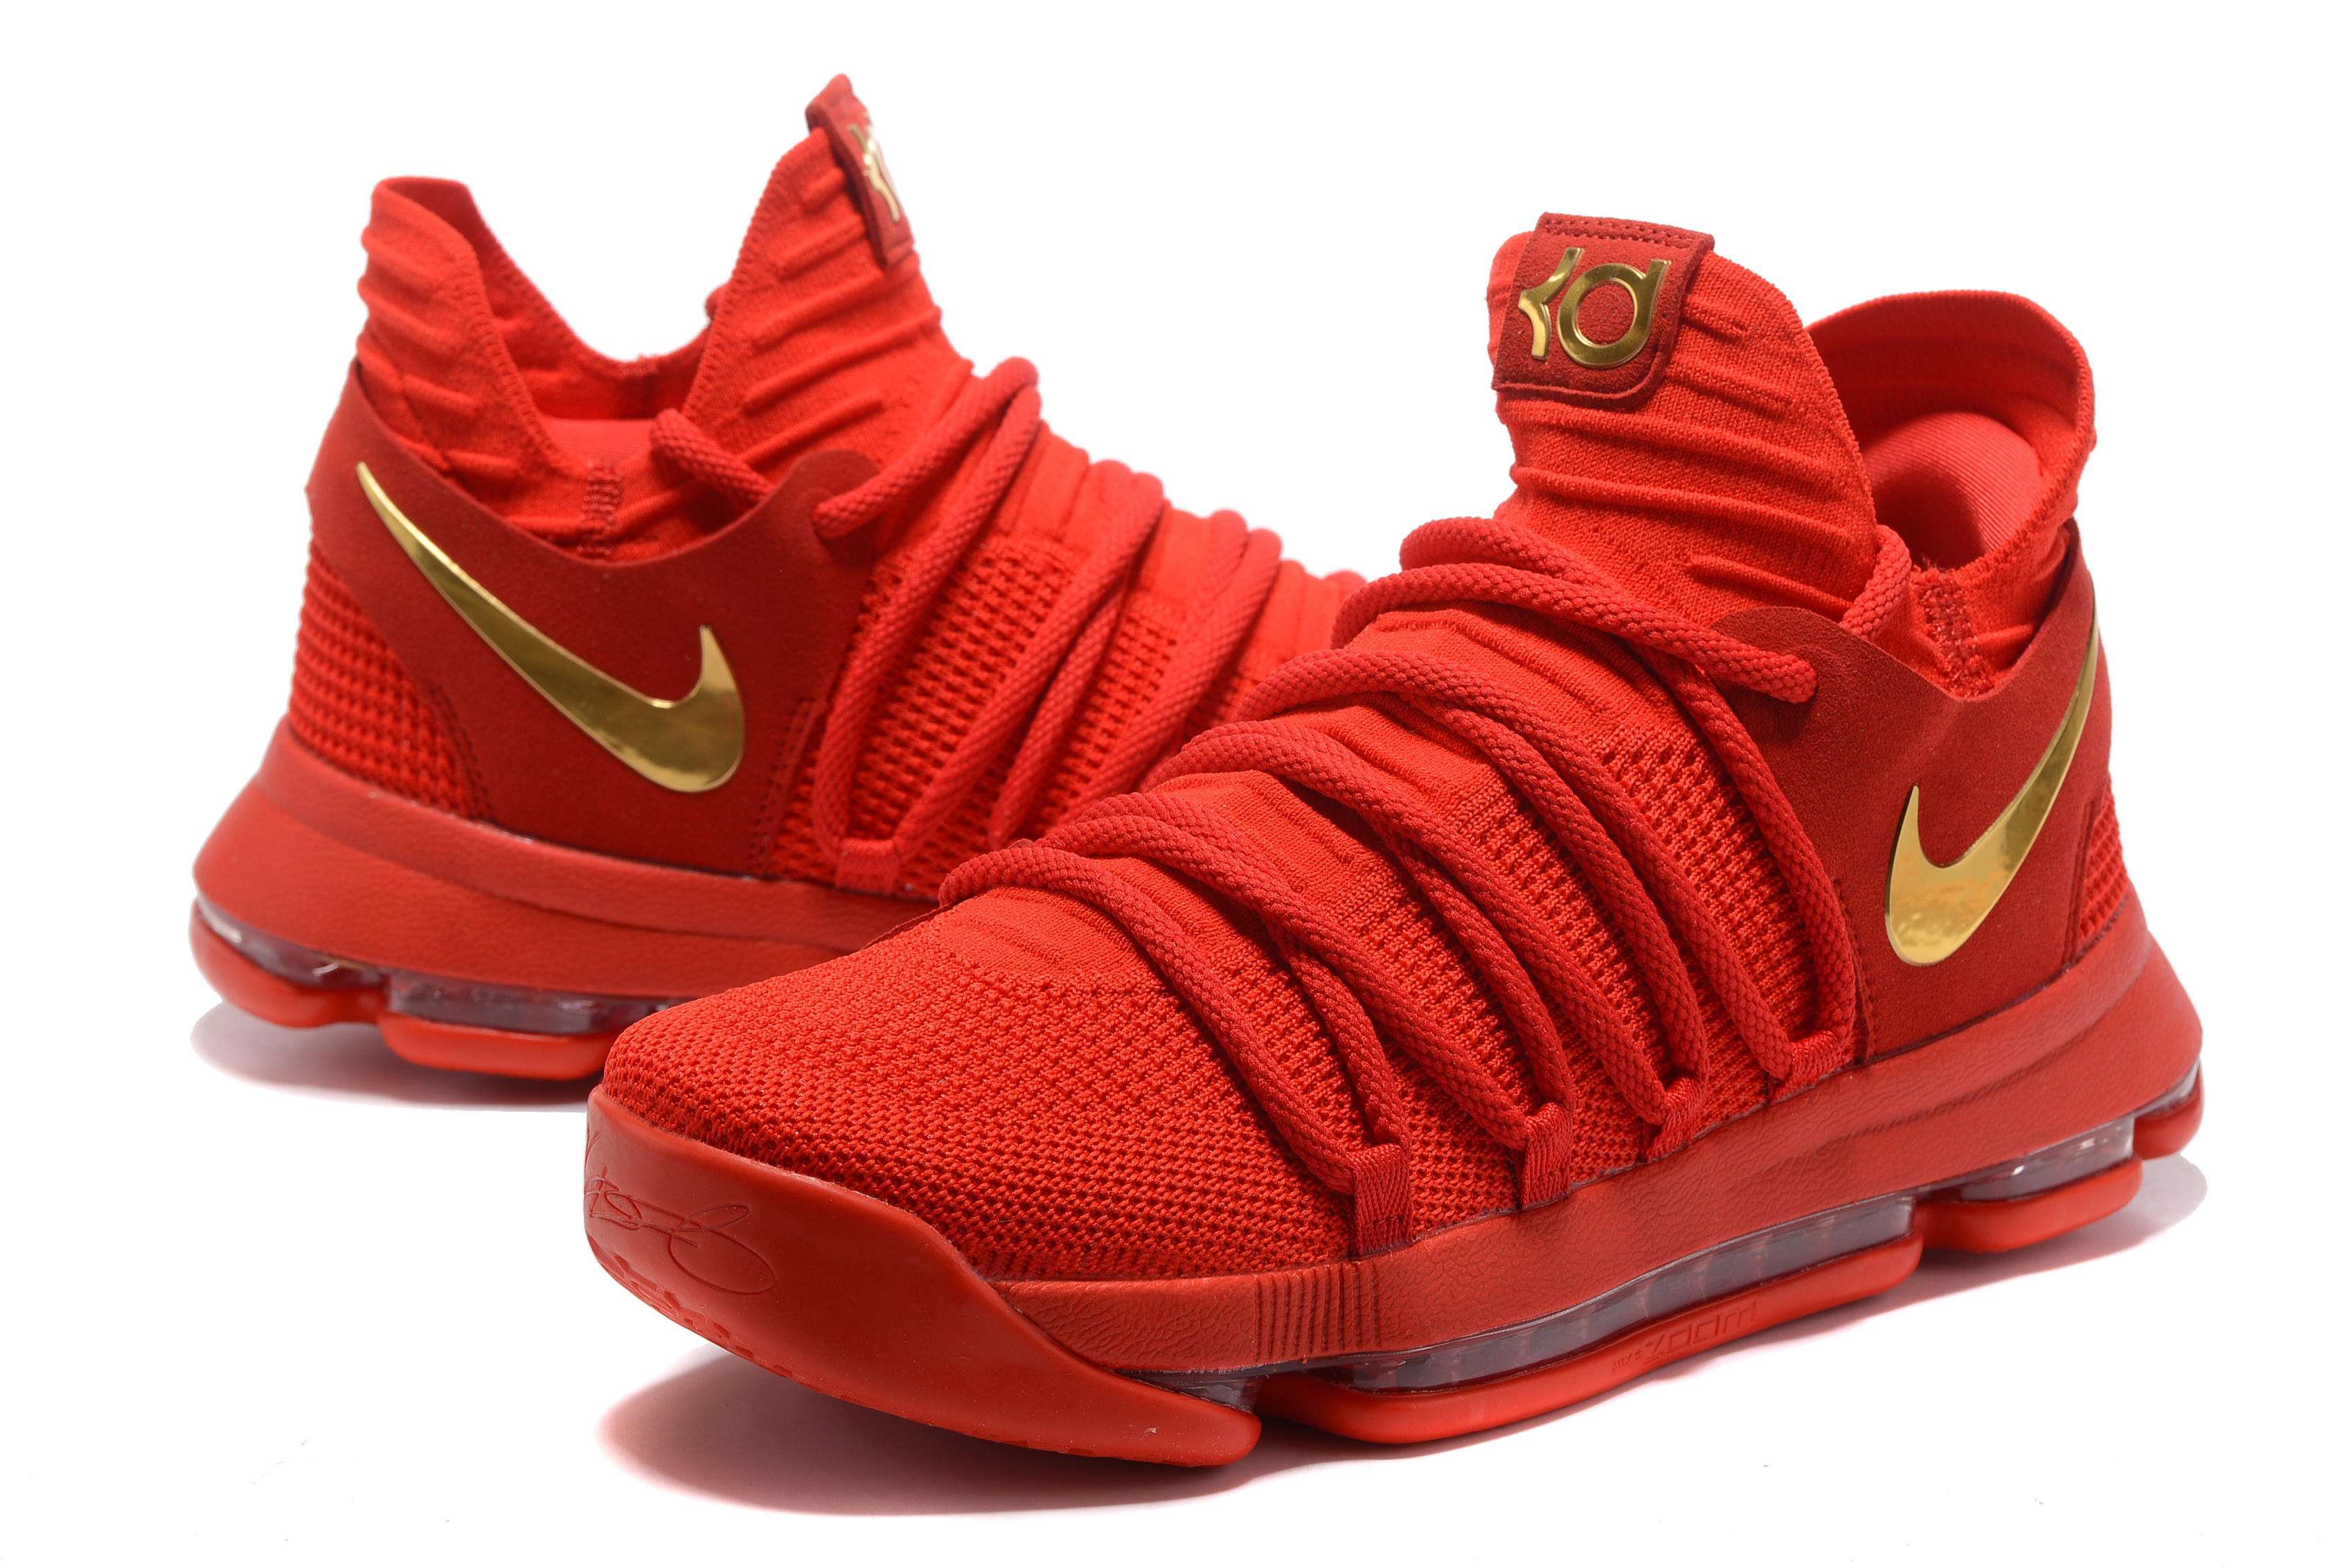 2017 Nike KD 10 Red Gloden Basketball Shoes